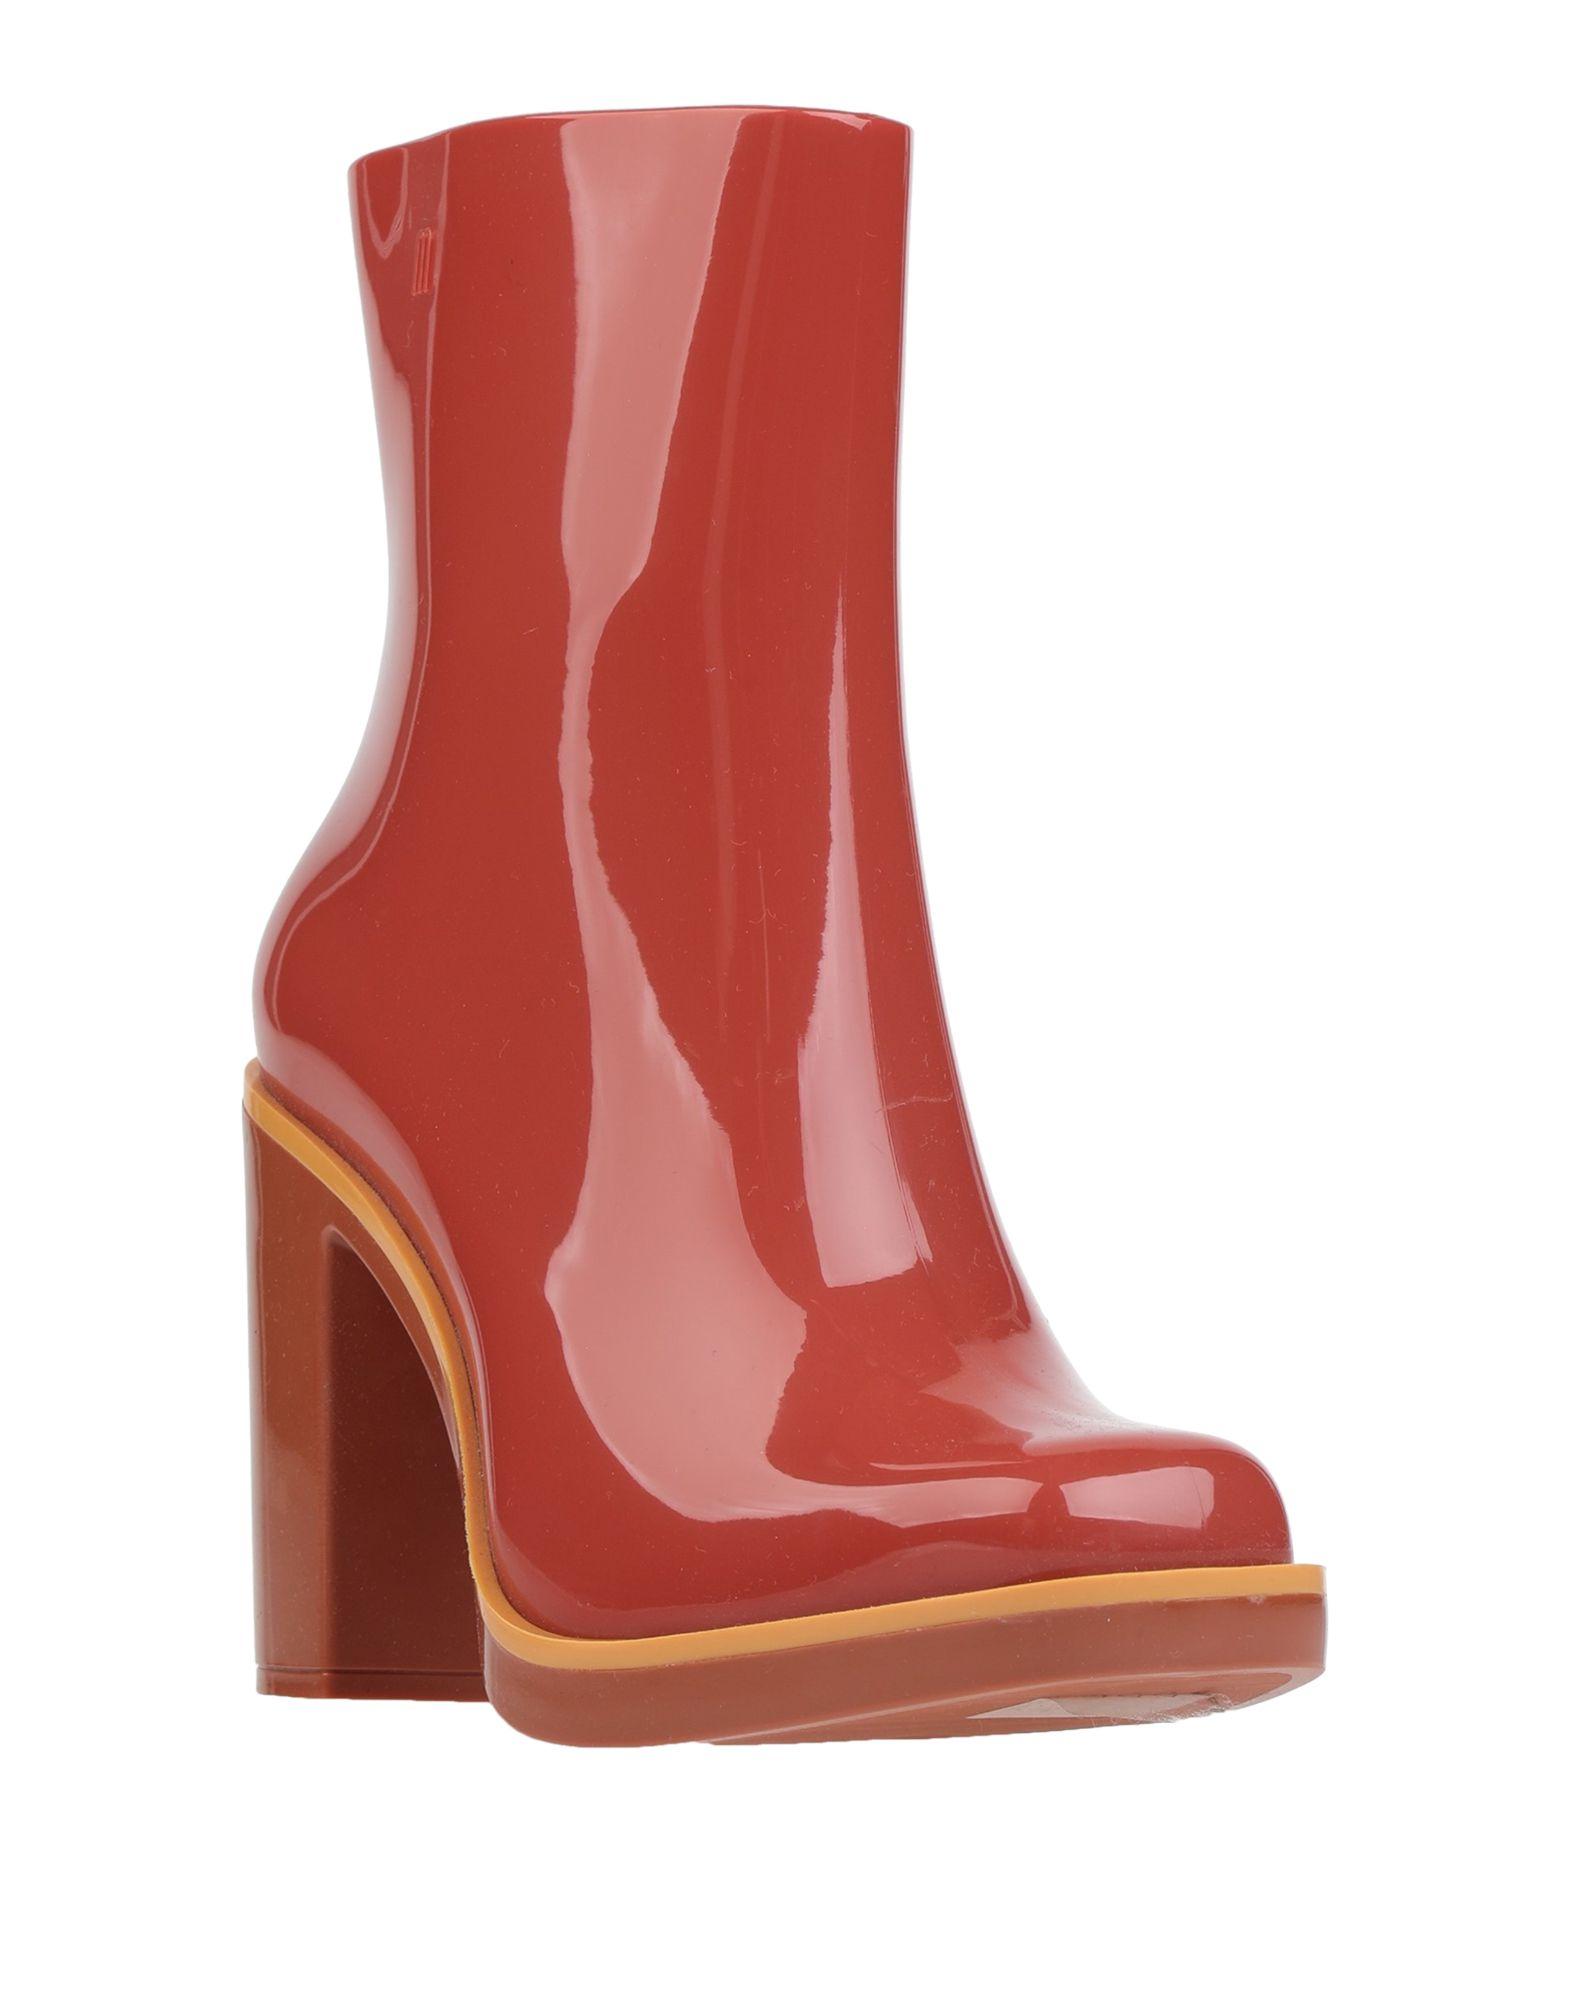 Melissa Rubber Ankle Boots in Rust (Red) - Lyst